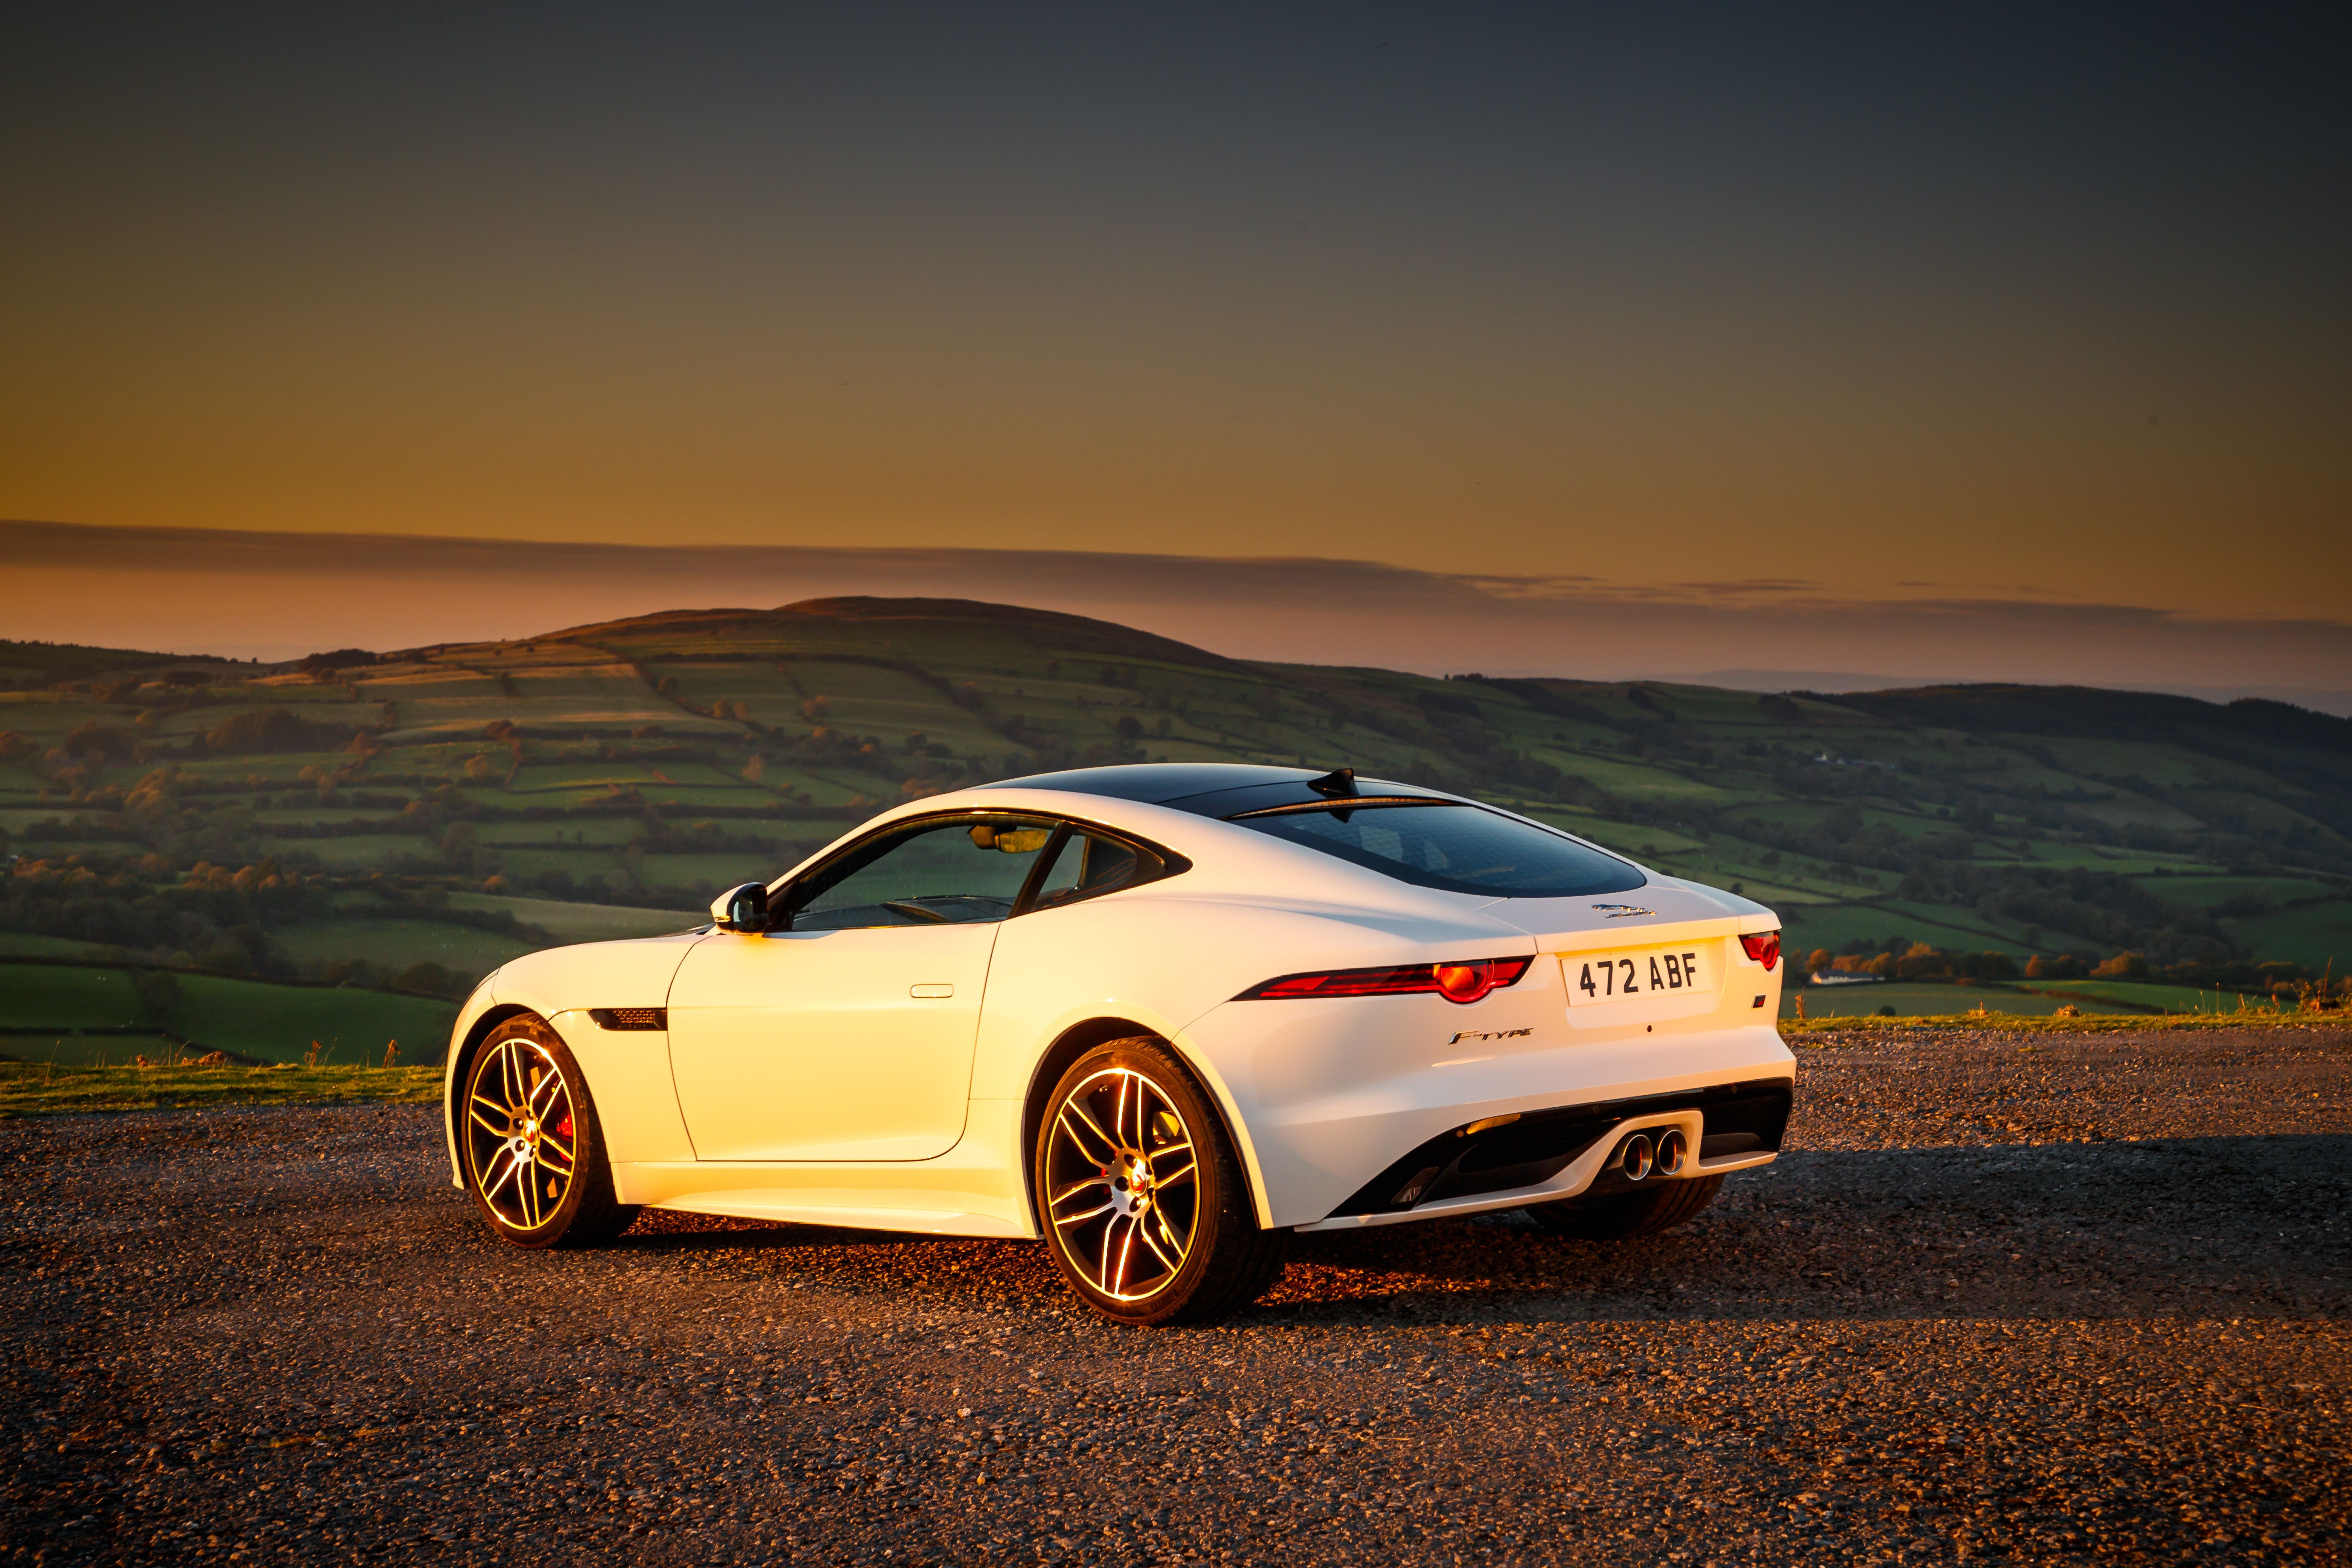 2019 Jaguar F-TYPE Checkered Flag Limited Edition Coupe